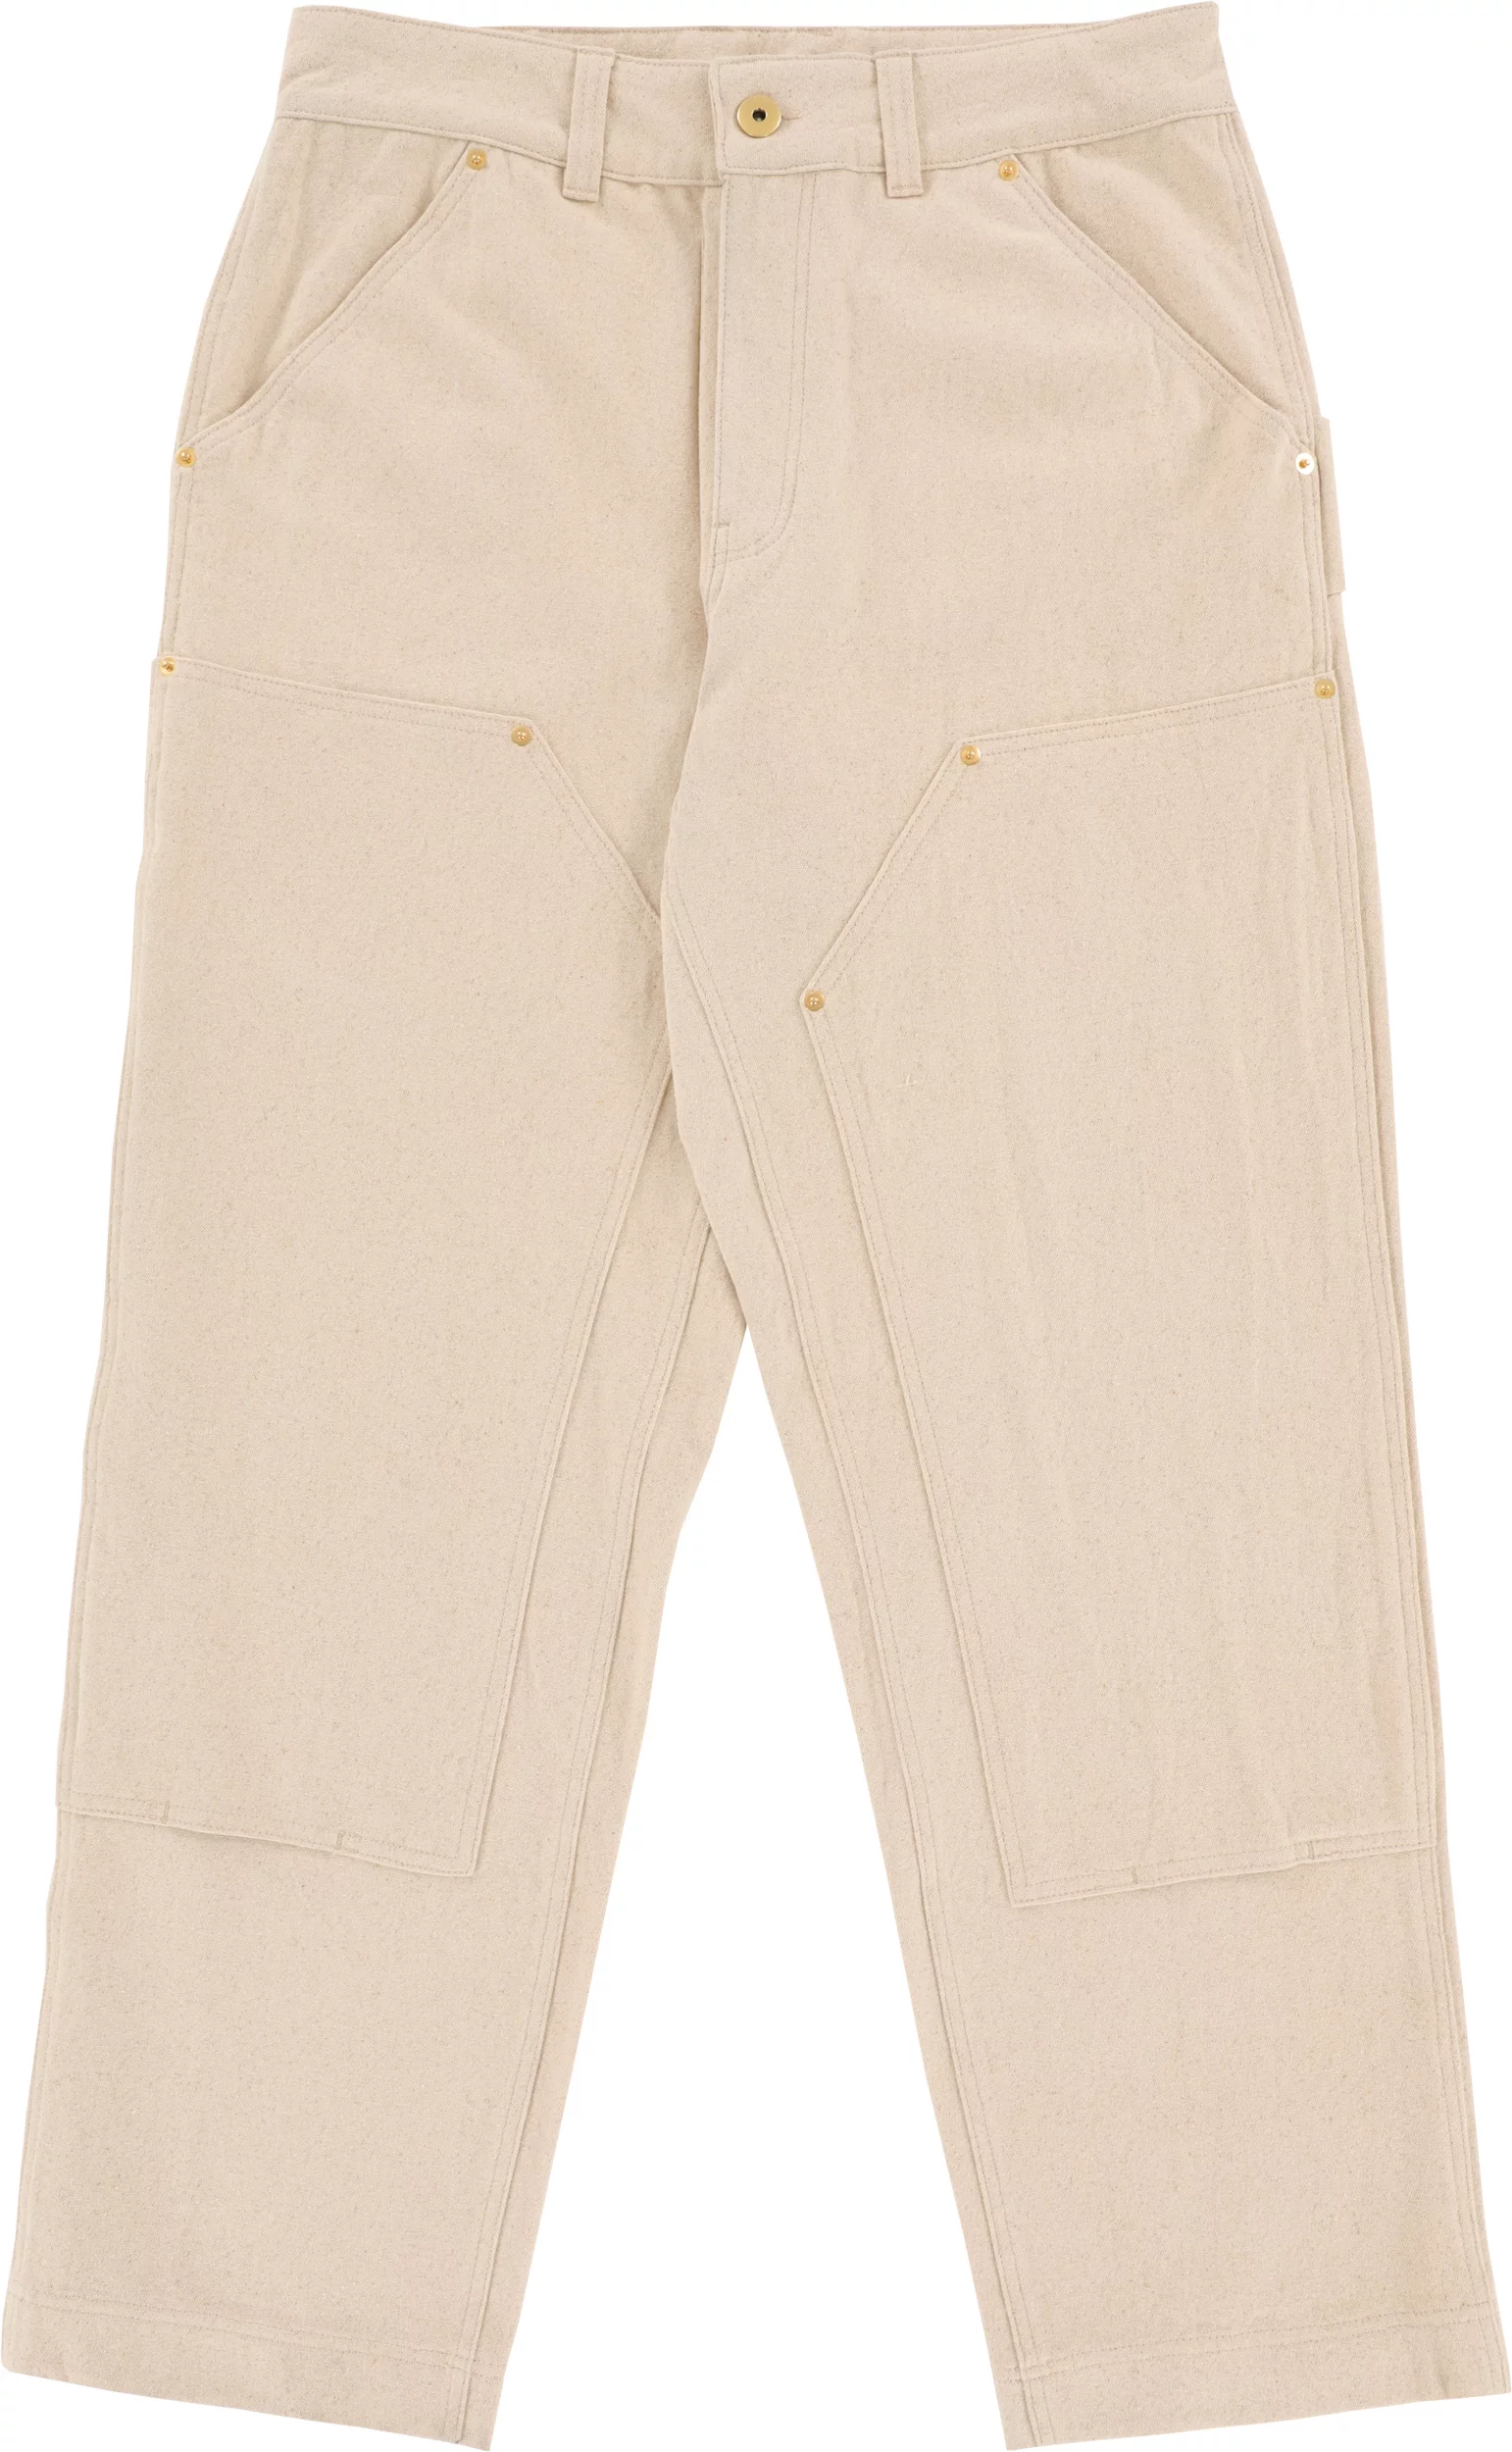 CAT Double Knee Machine Pant | Urban Outfitters